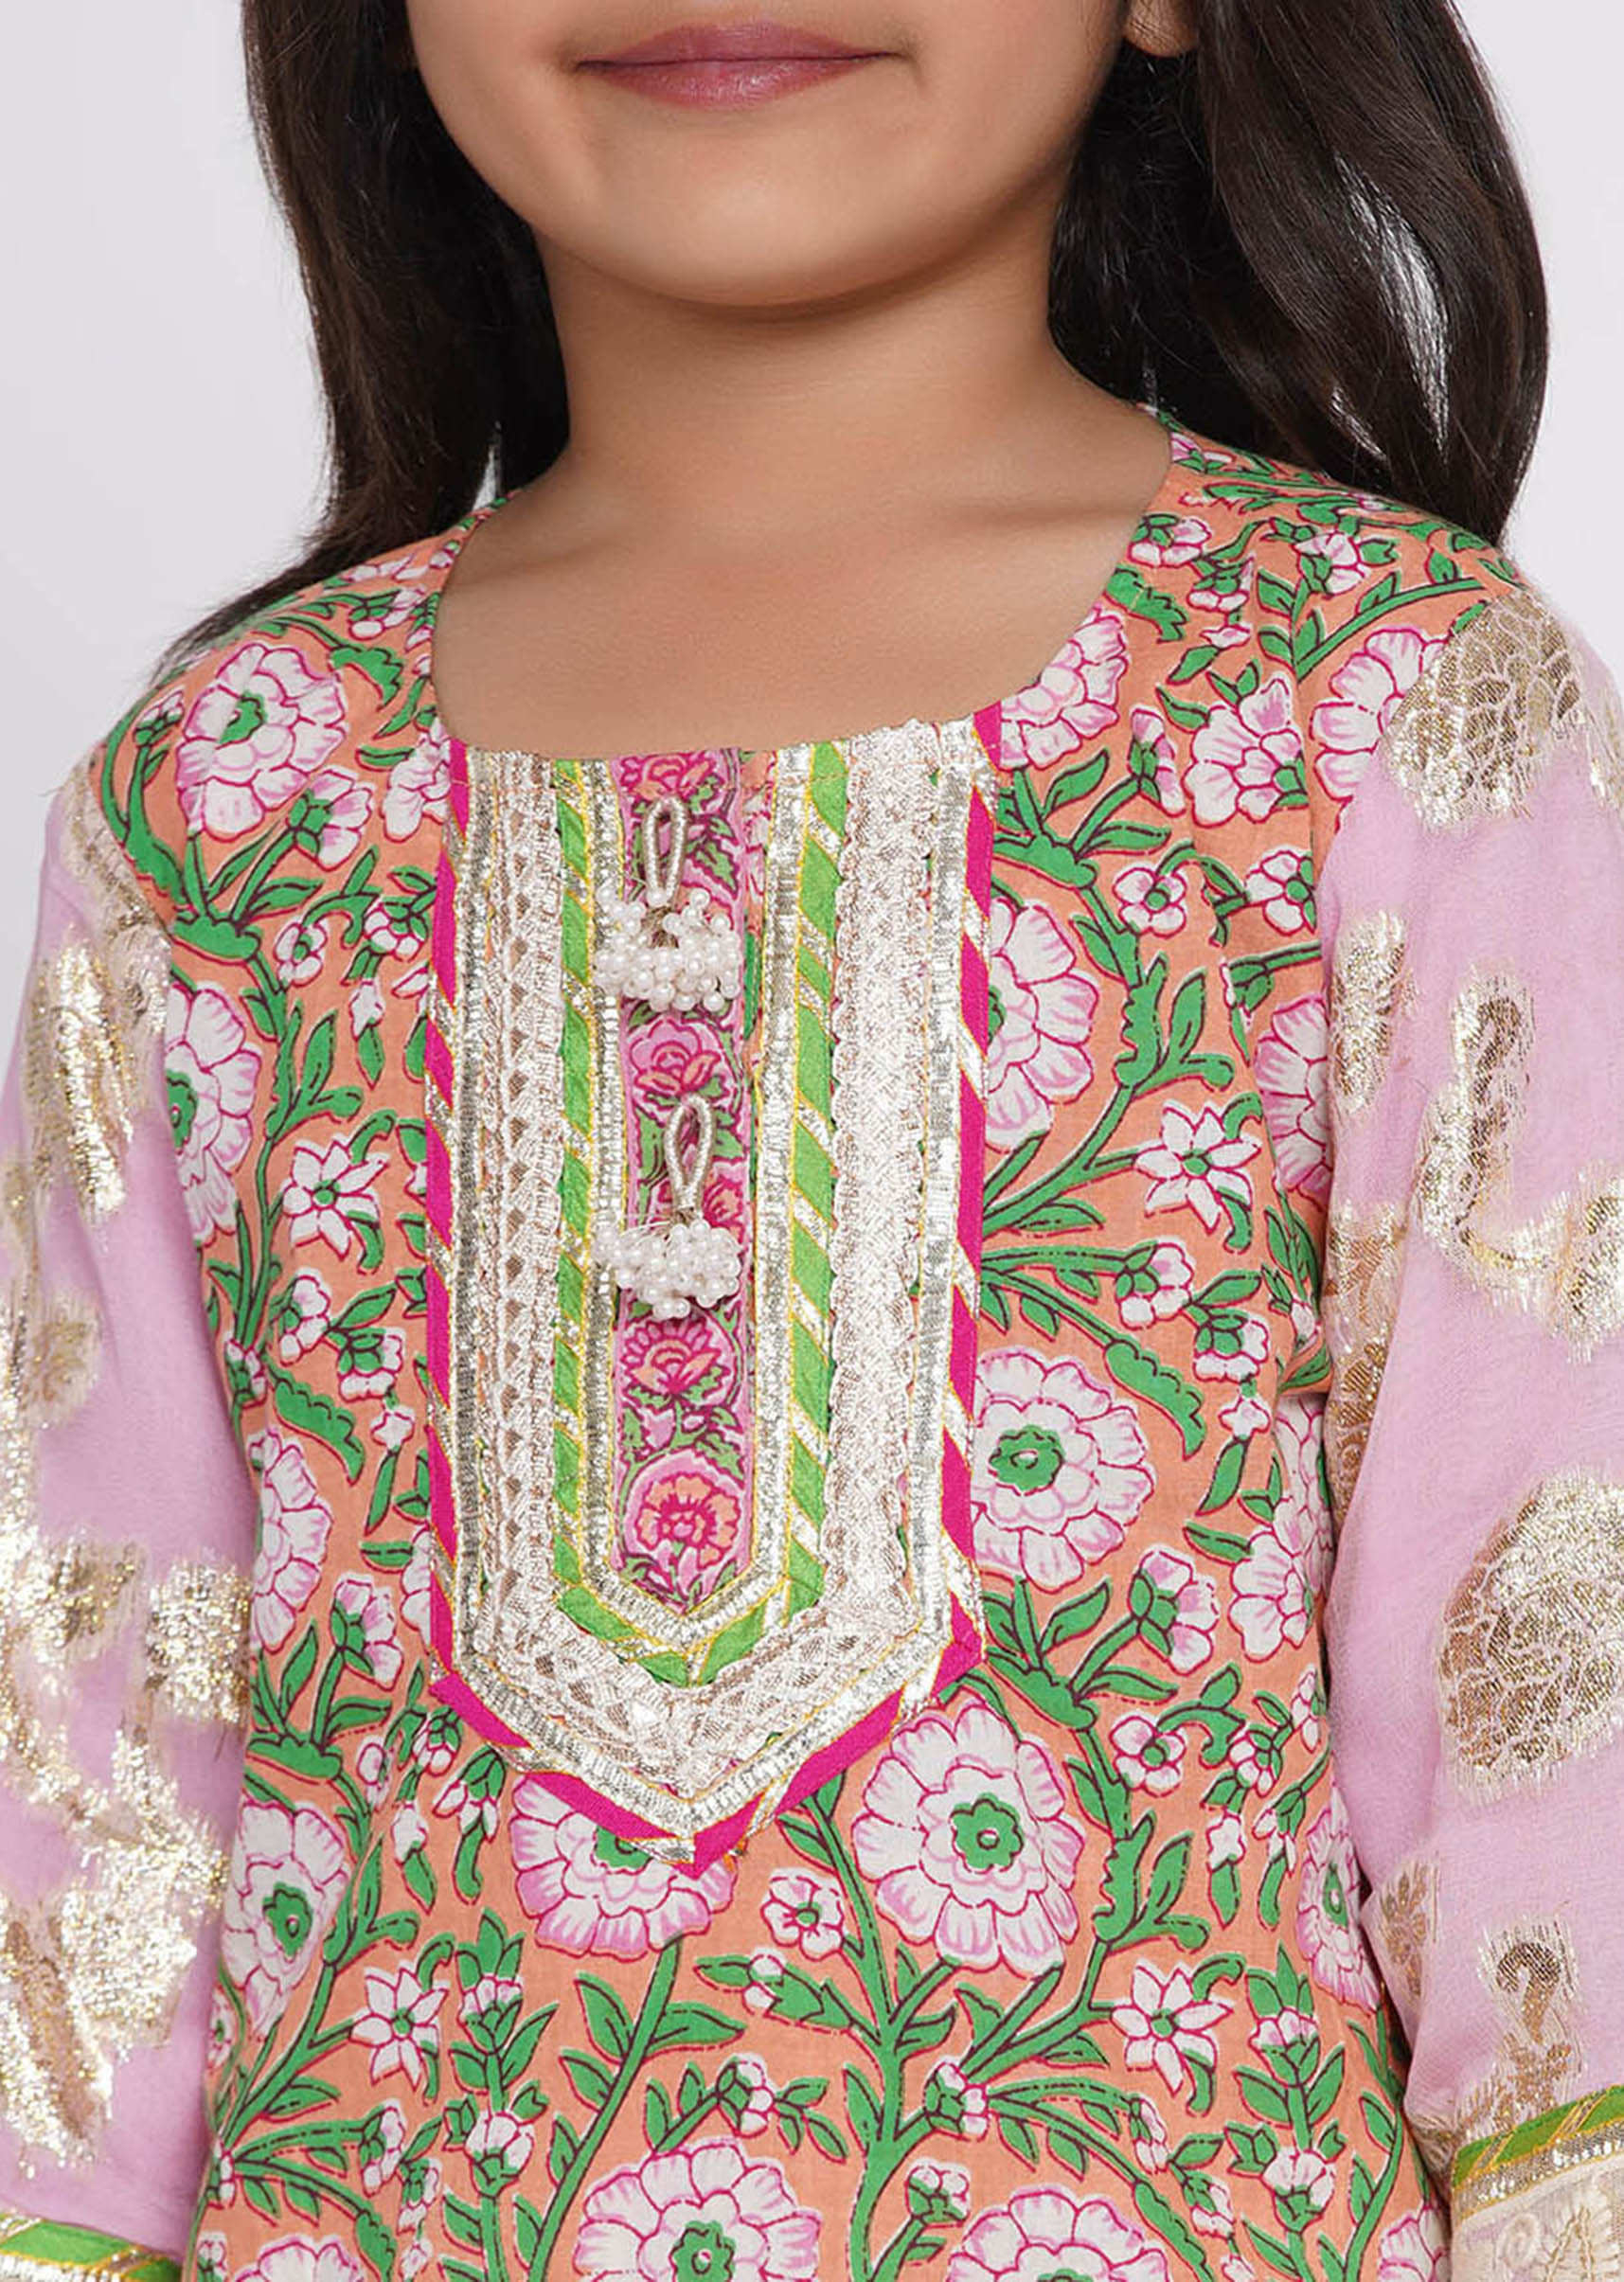 Kalki Girls Pink Cotton Sharara Suit With Embroidery